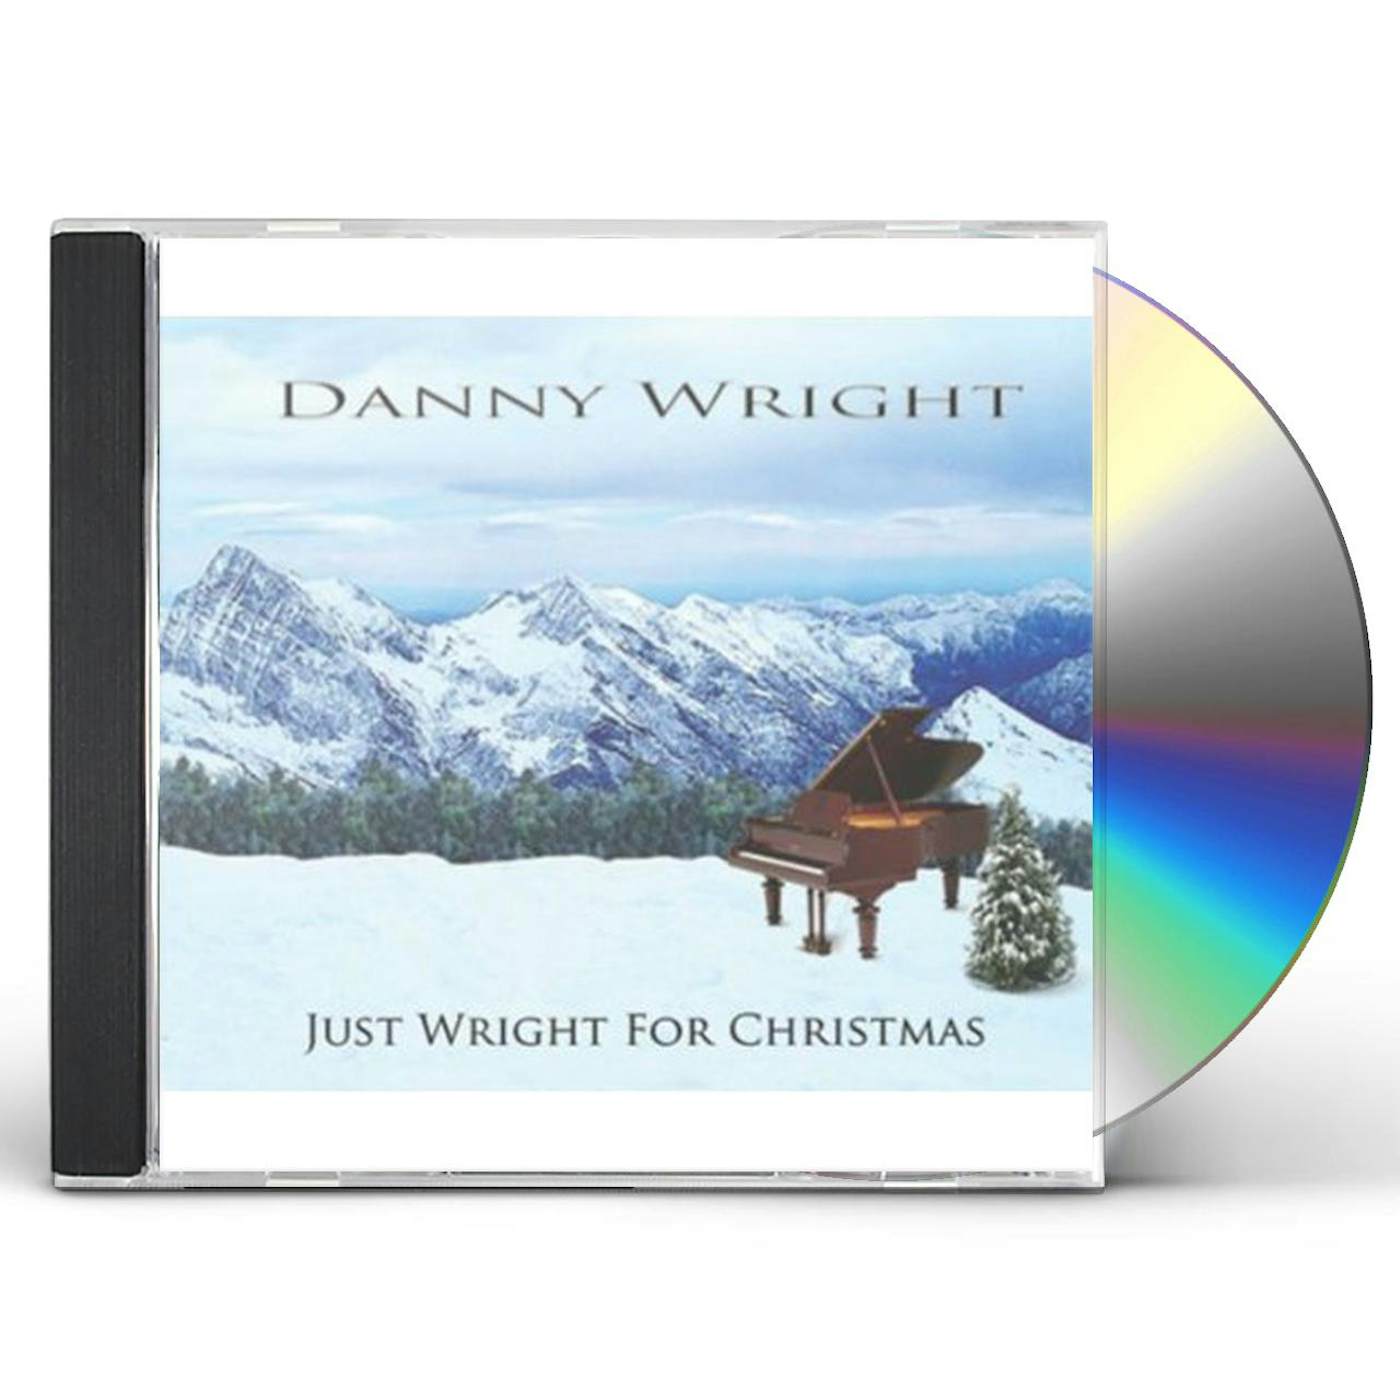 Danny Wright JUST WRIGHT FOR CHRISTMAS CD